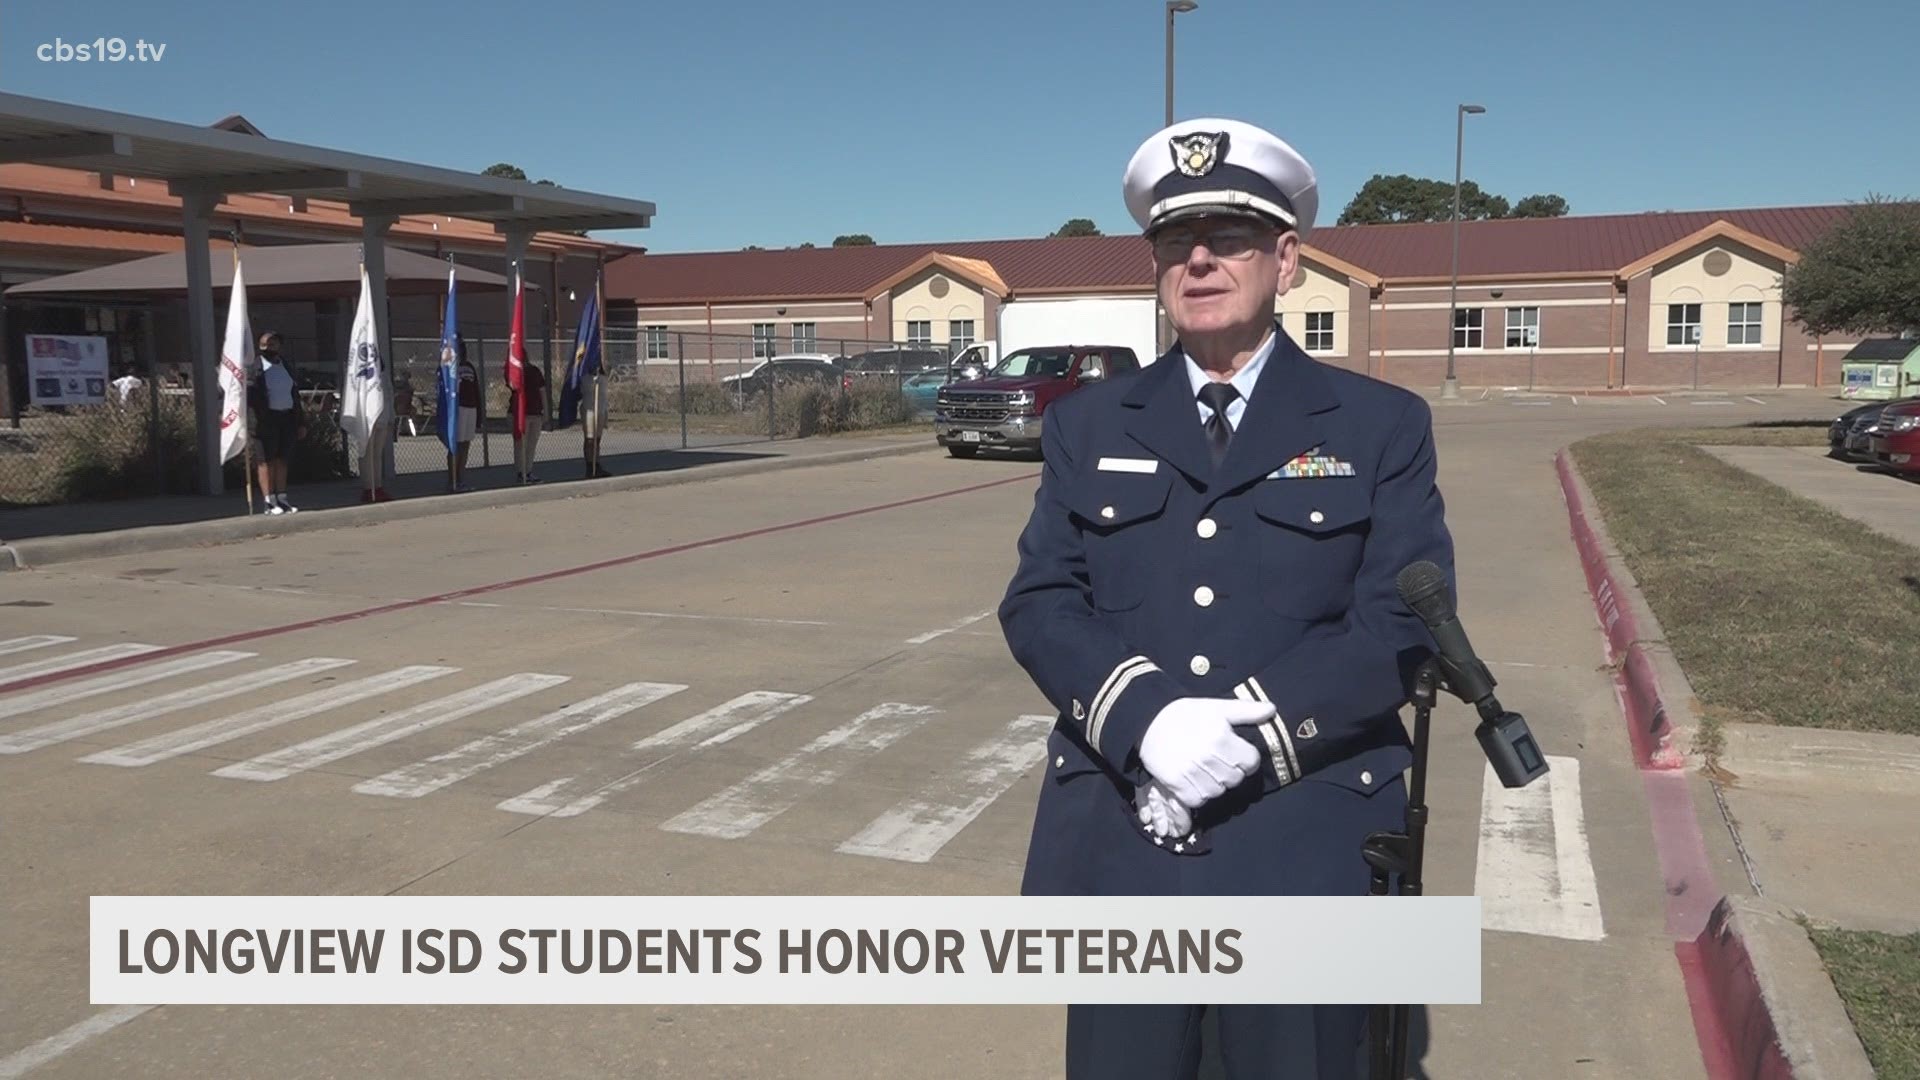 Longview ISD students honored veterans with drive-thru luncheon.